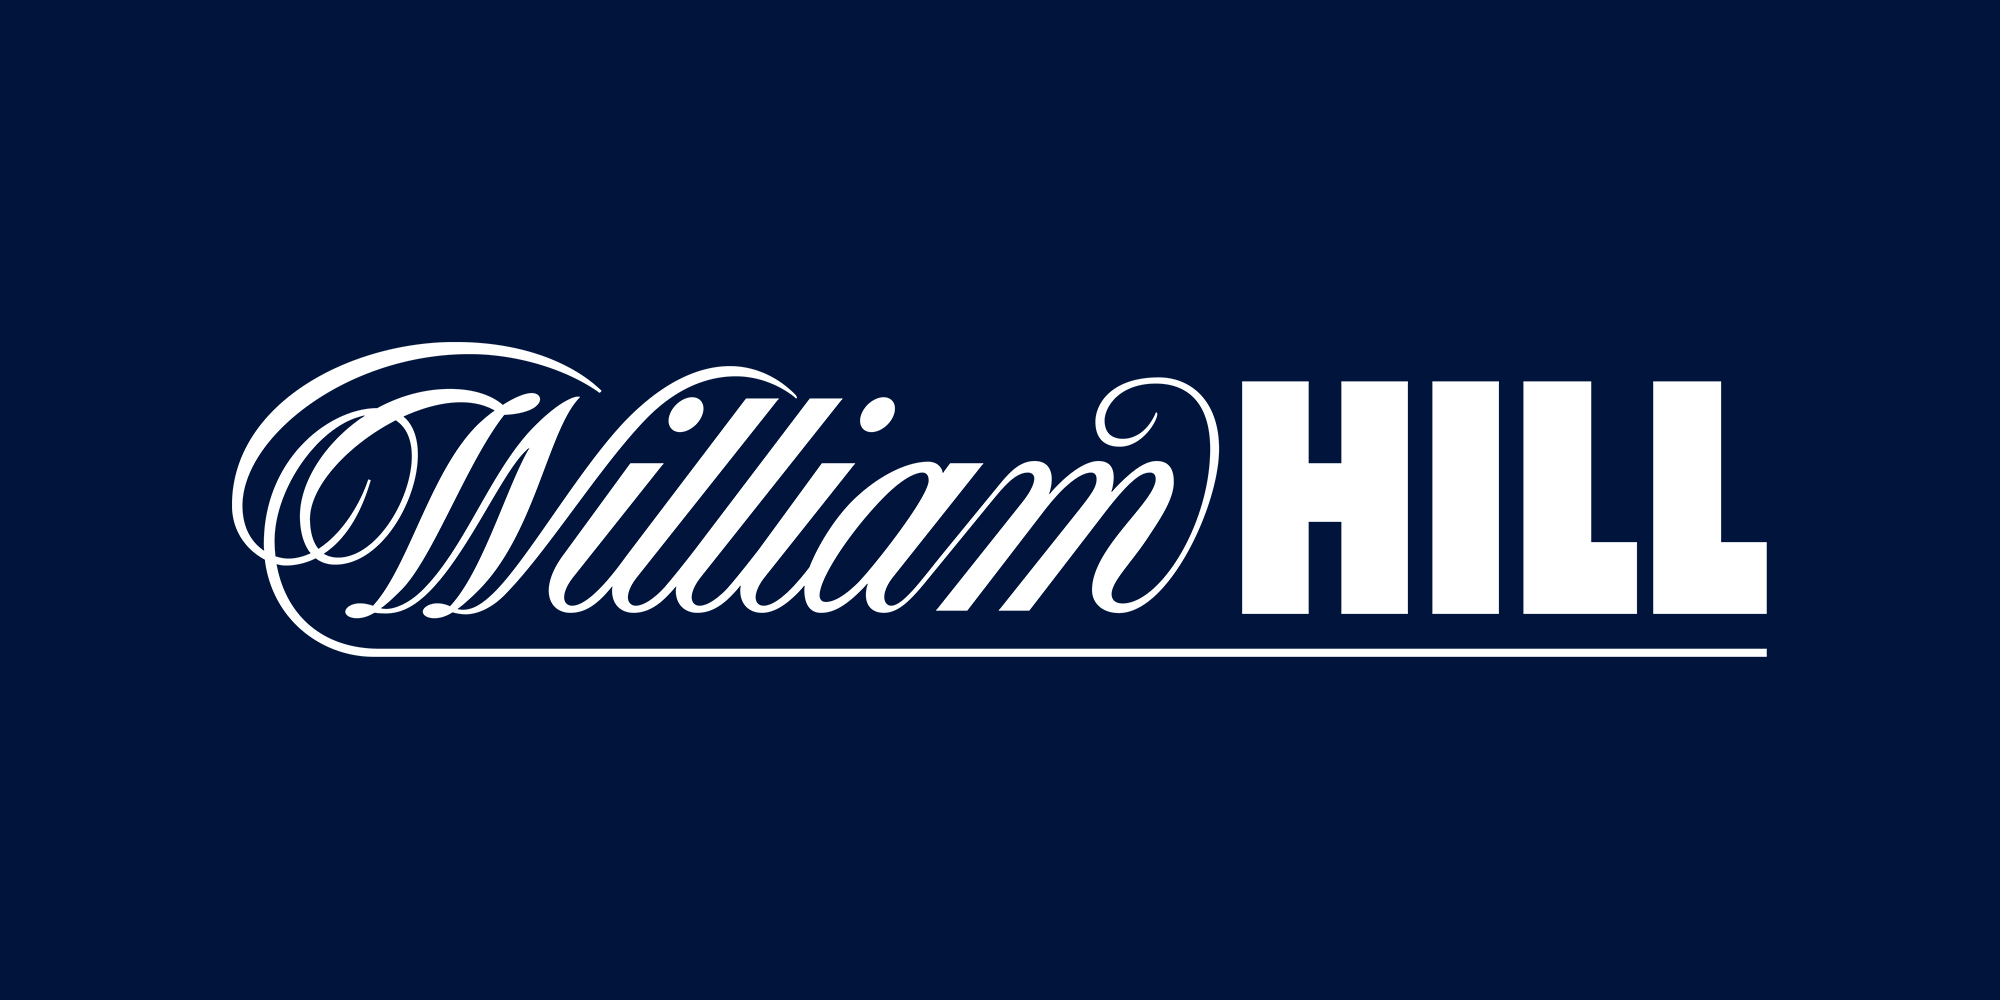 William Hill announces end of operation for three brands